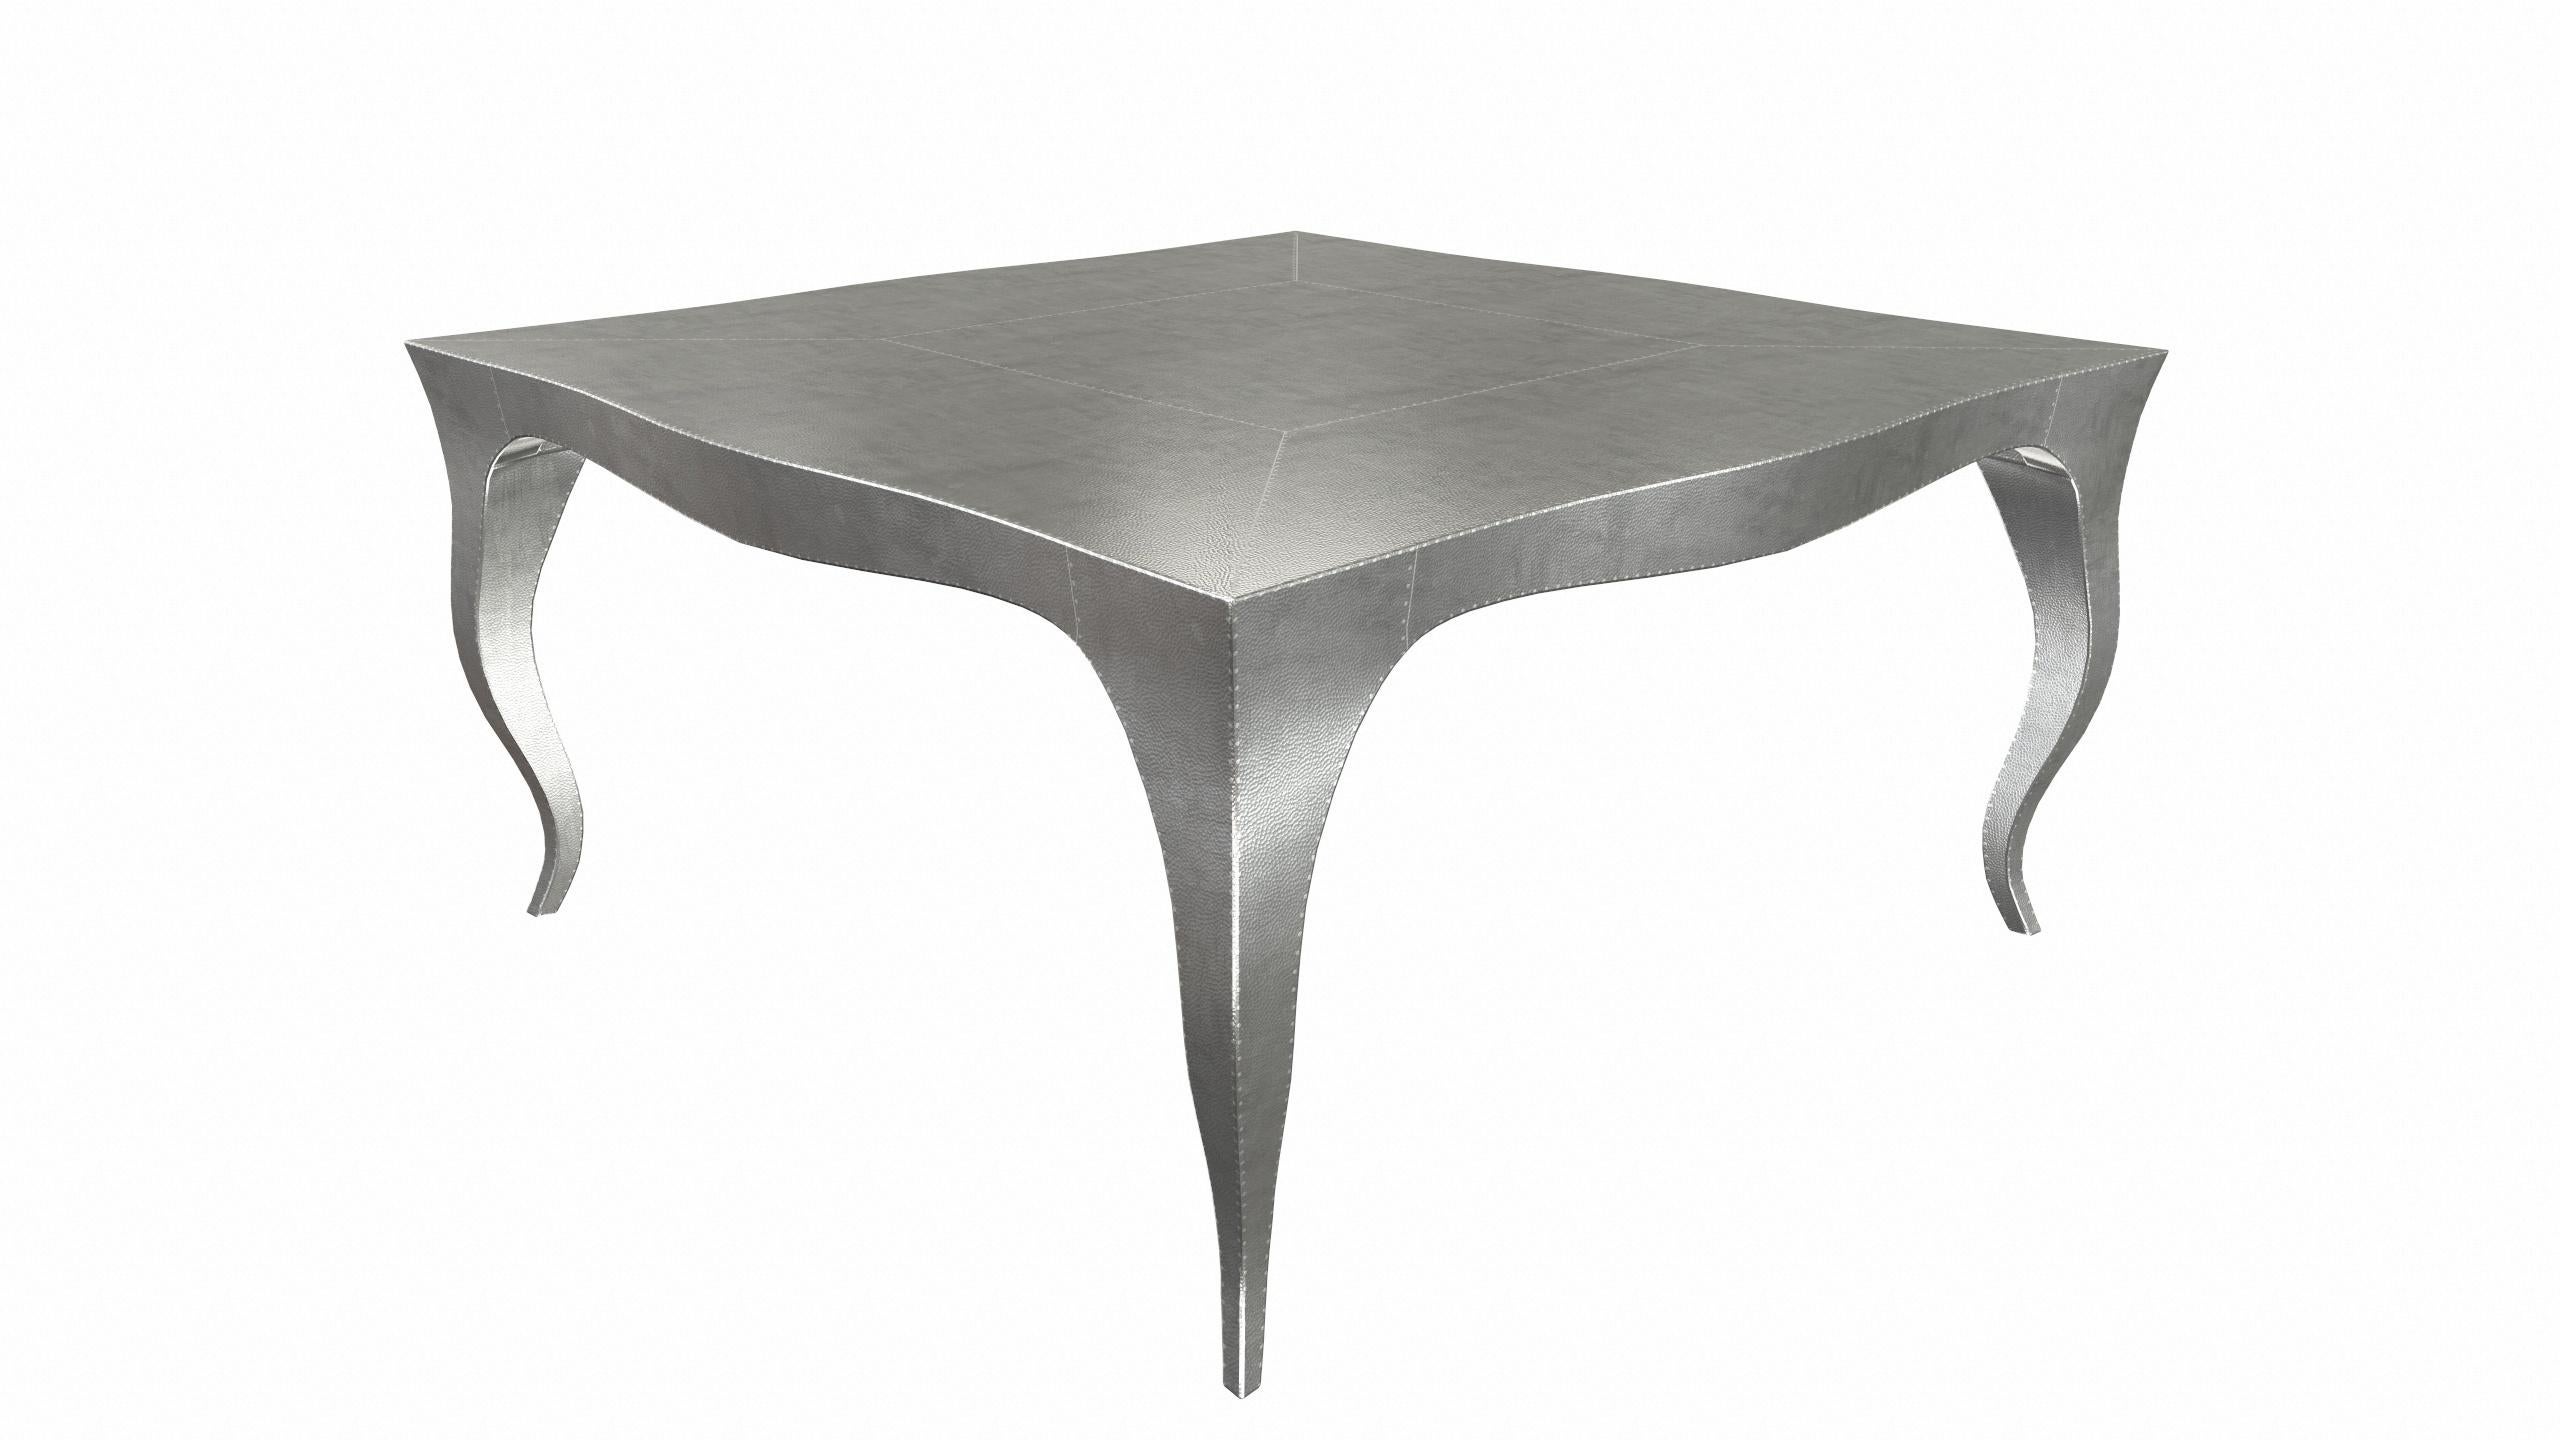 American Louise Art Deco Industrial and Work Tables Mid. Hammered White Bronze by Paul Ma For Sale